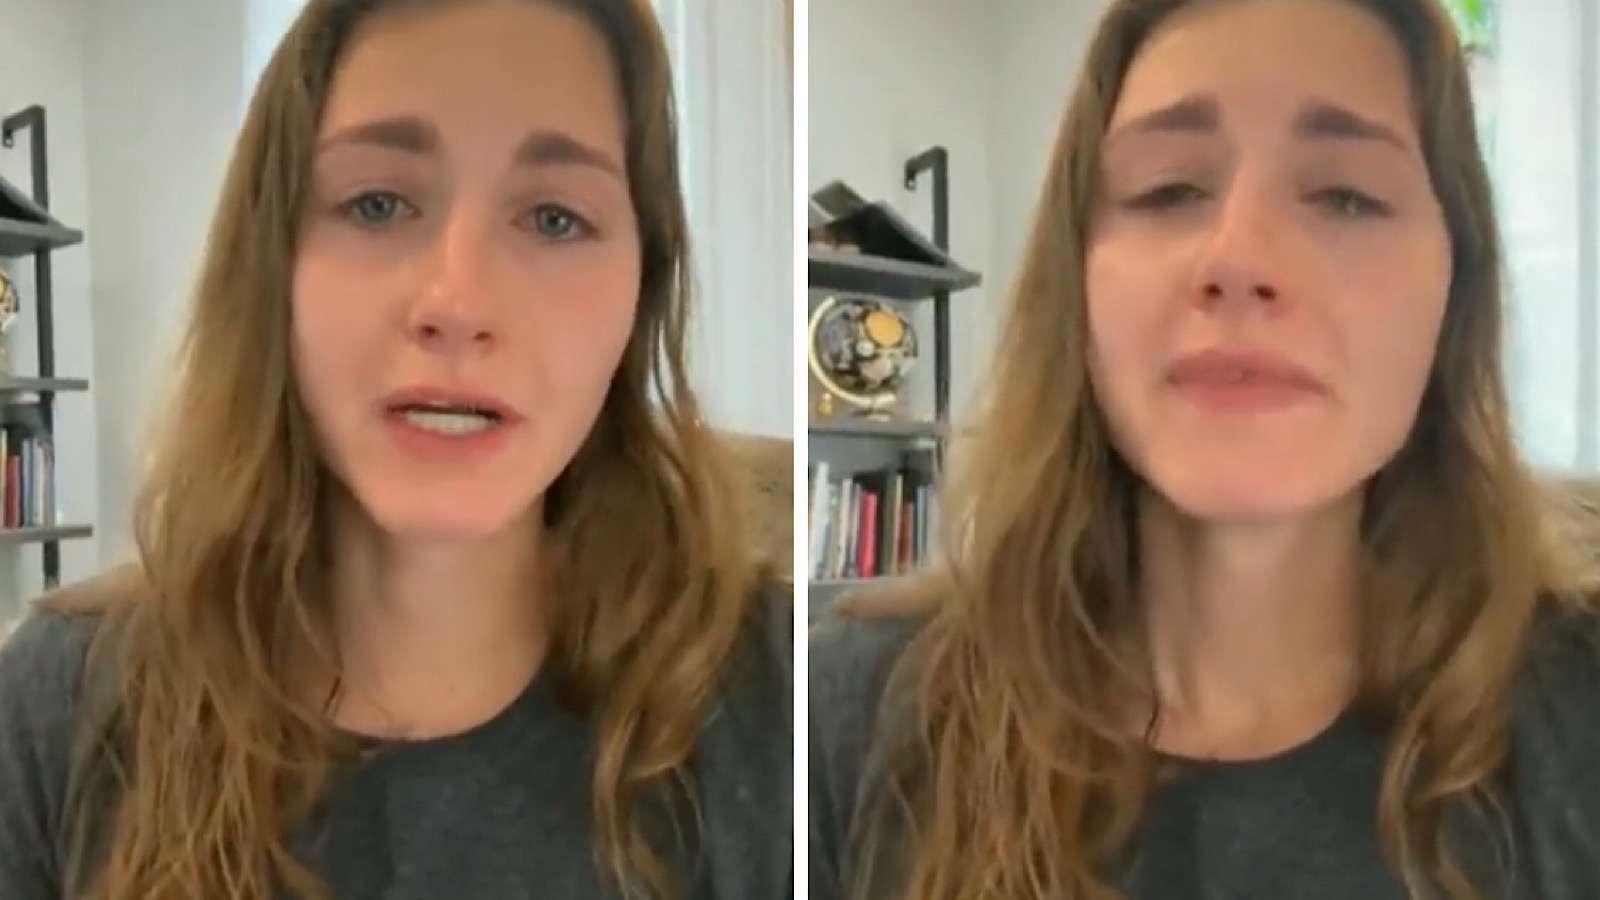 Woman tearfully claims men only want "robots" and "screens."